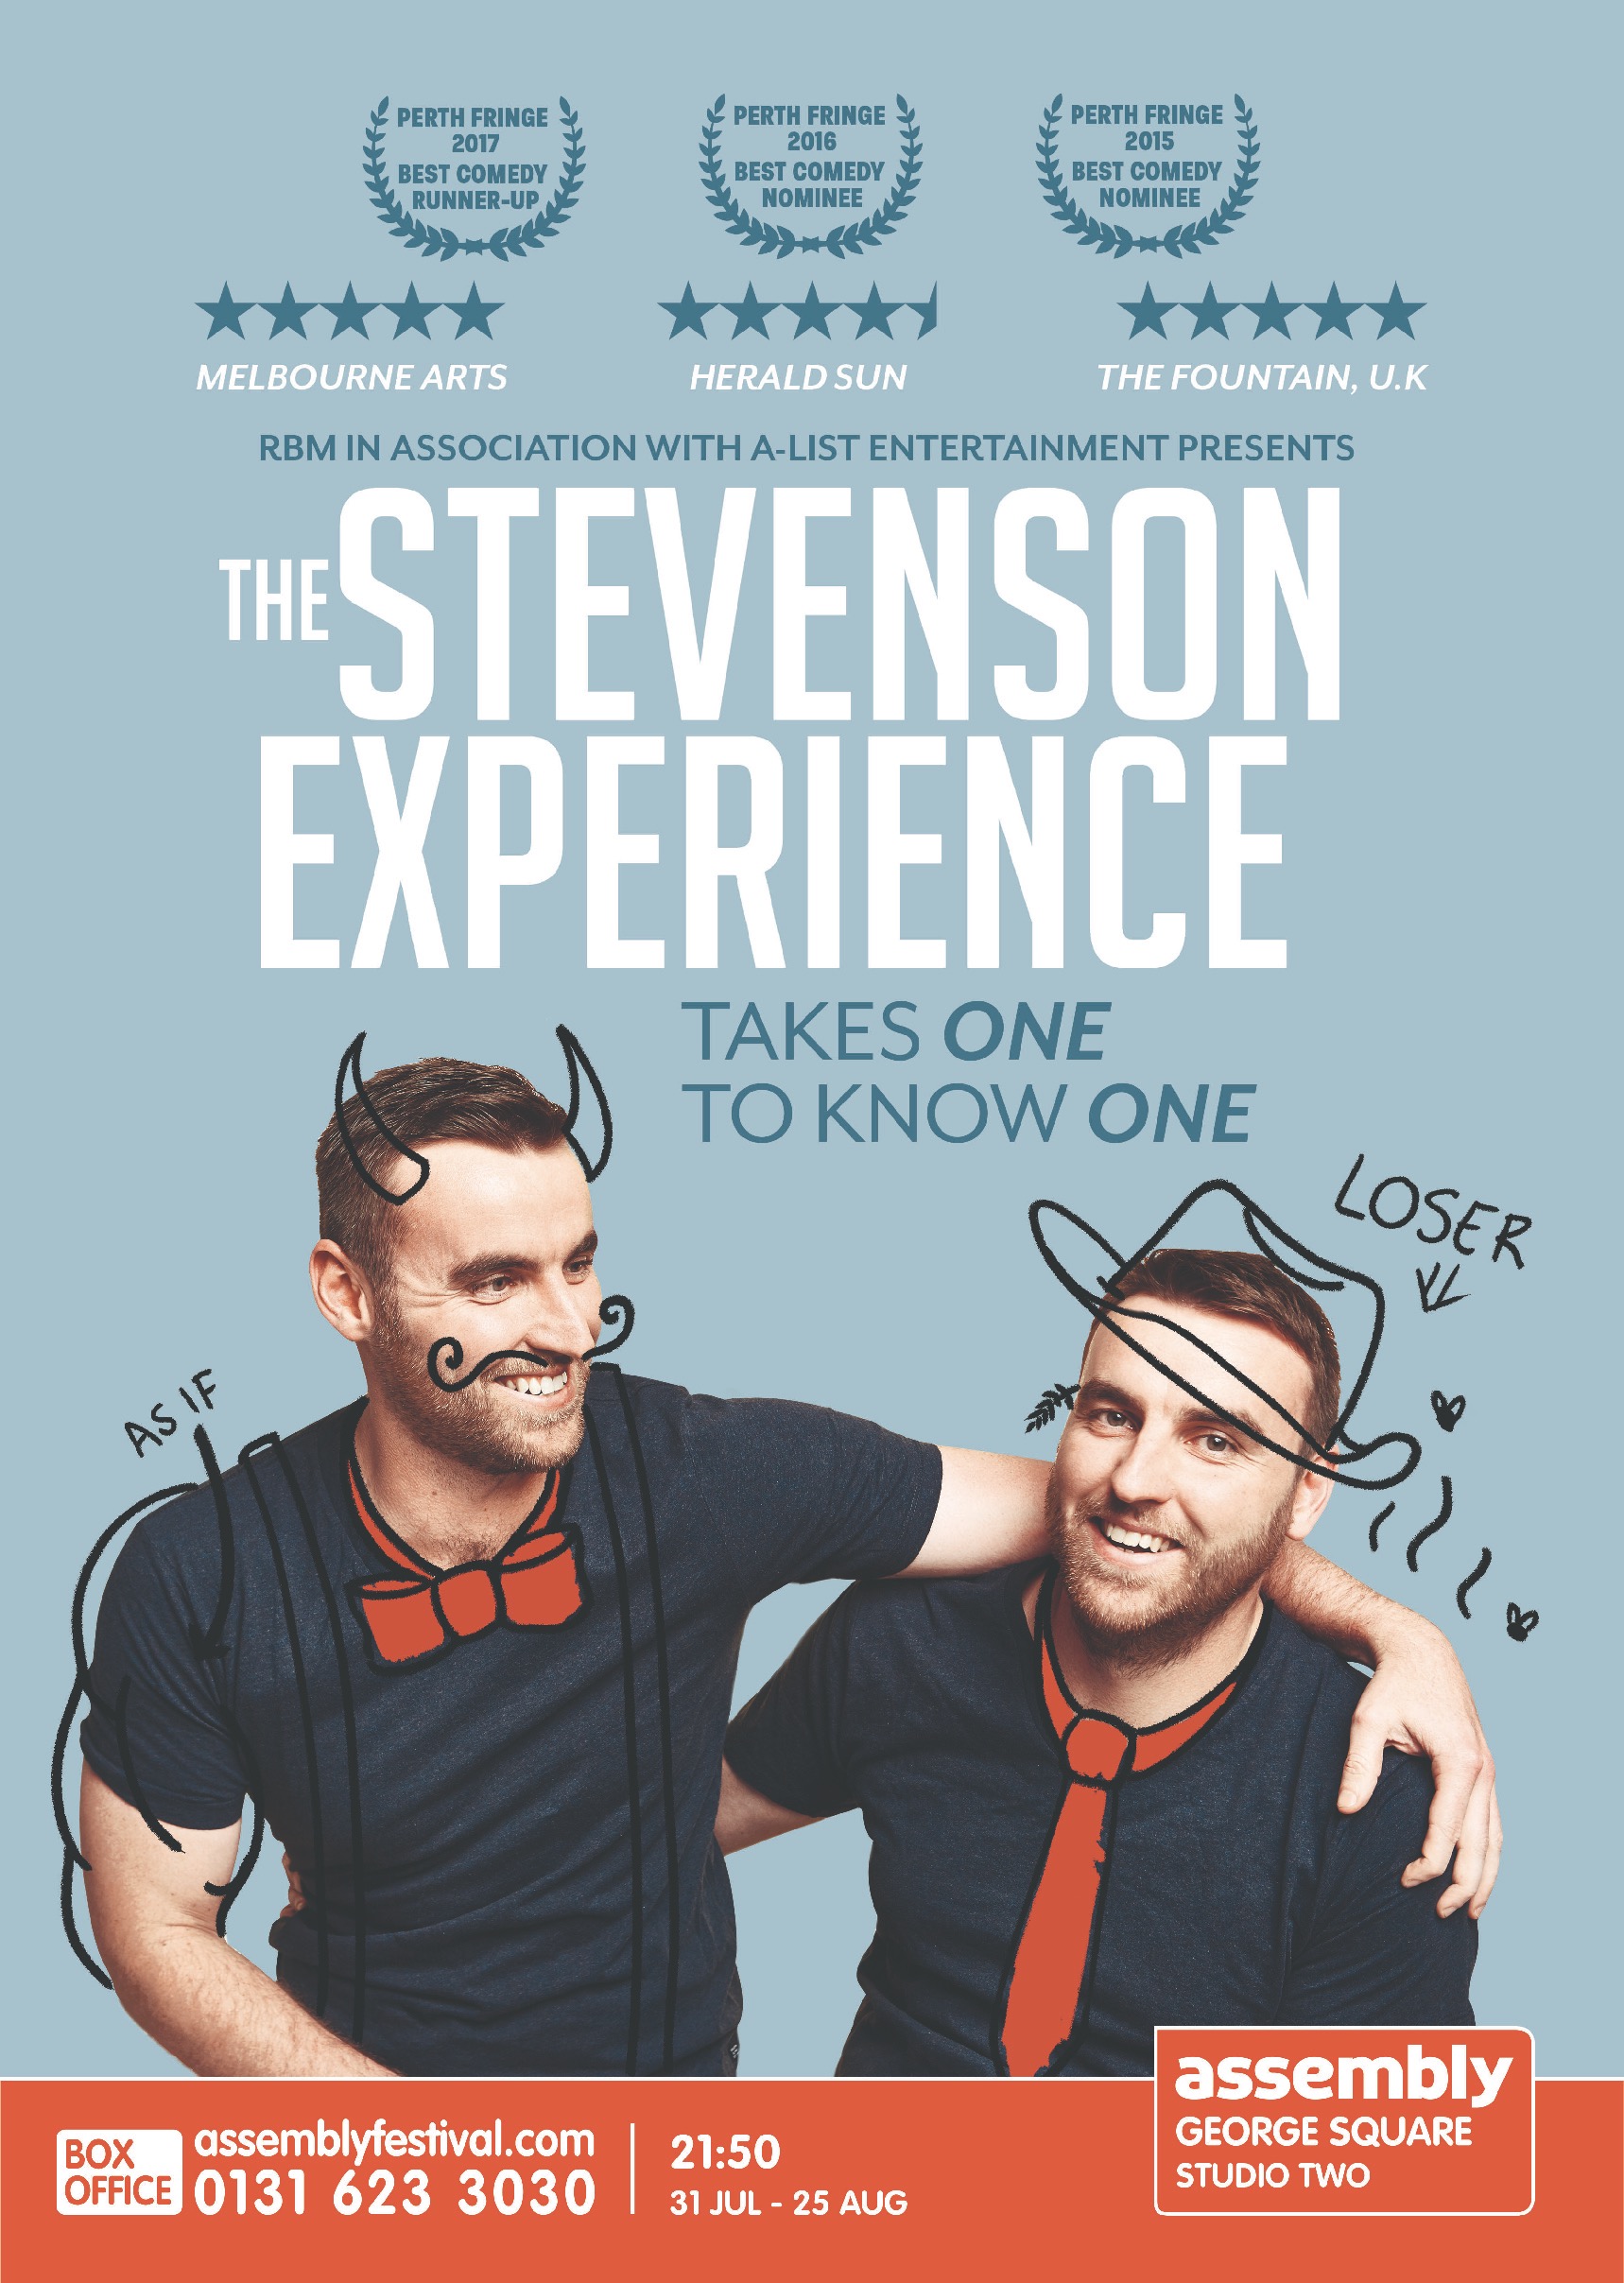 The poster for The Stevenson Experience: Takes One to Know One